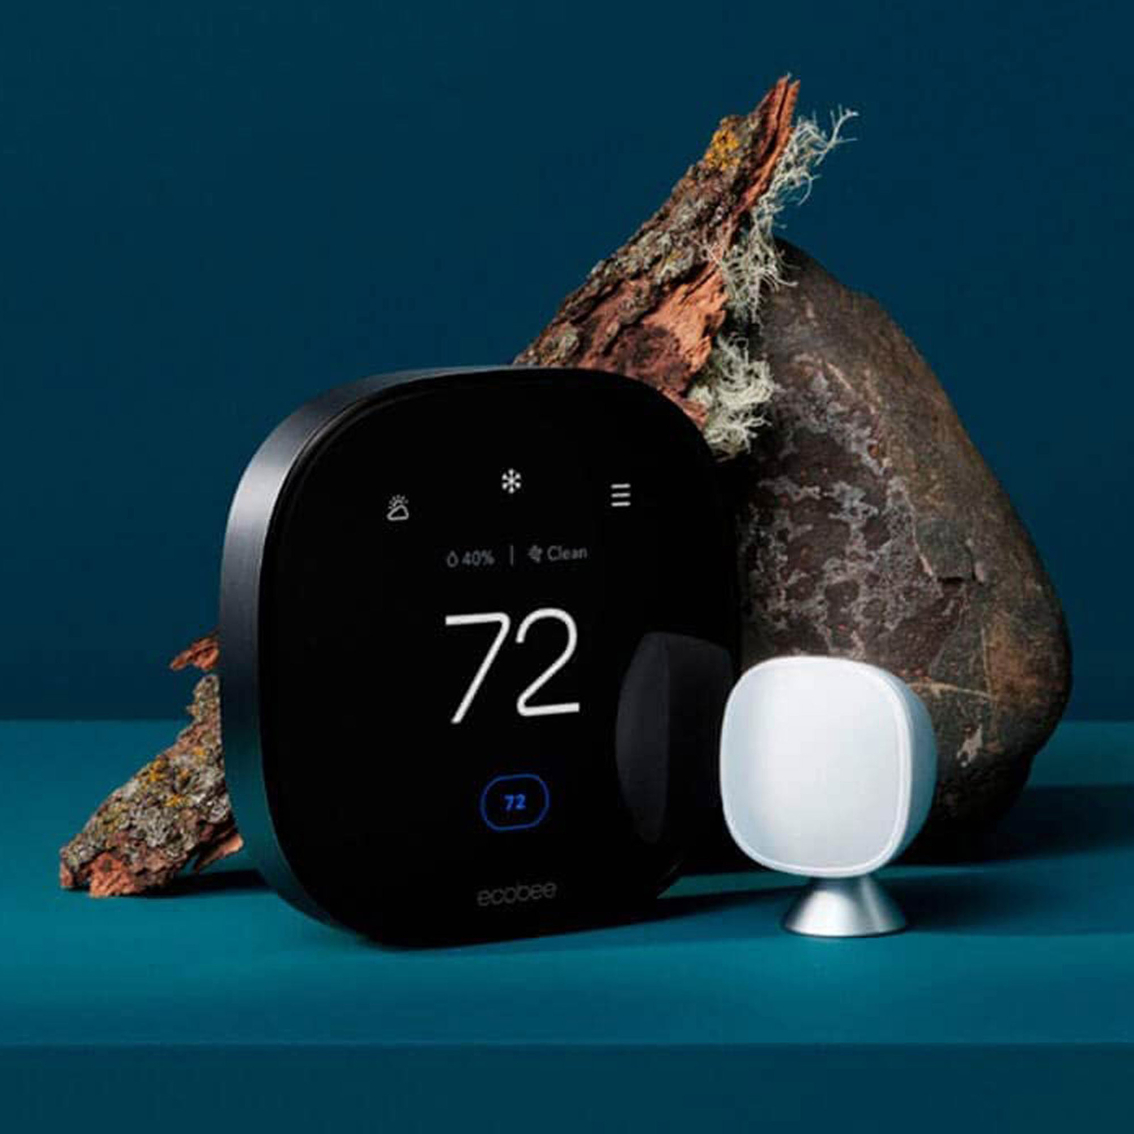 Ecobee Premium Smart Programmable Touch Screen Thermostat - Image 6 of 6